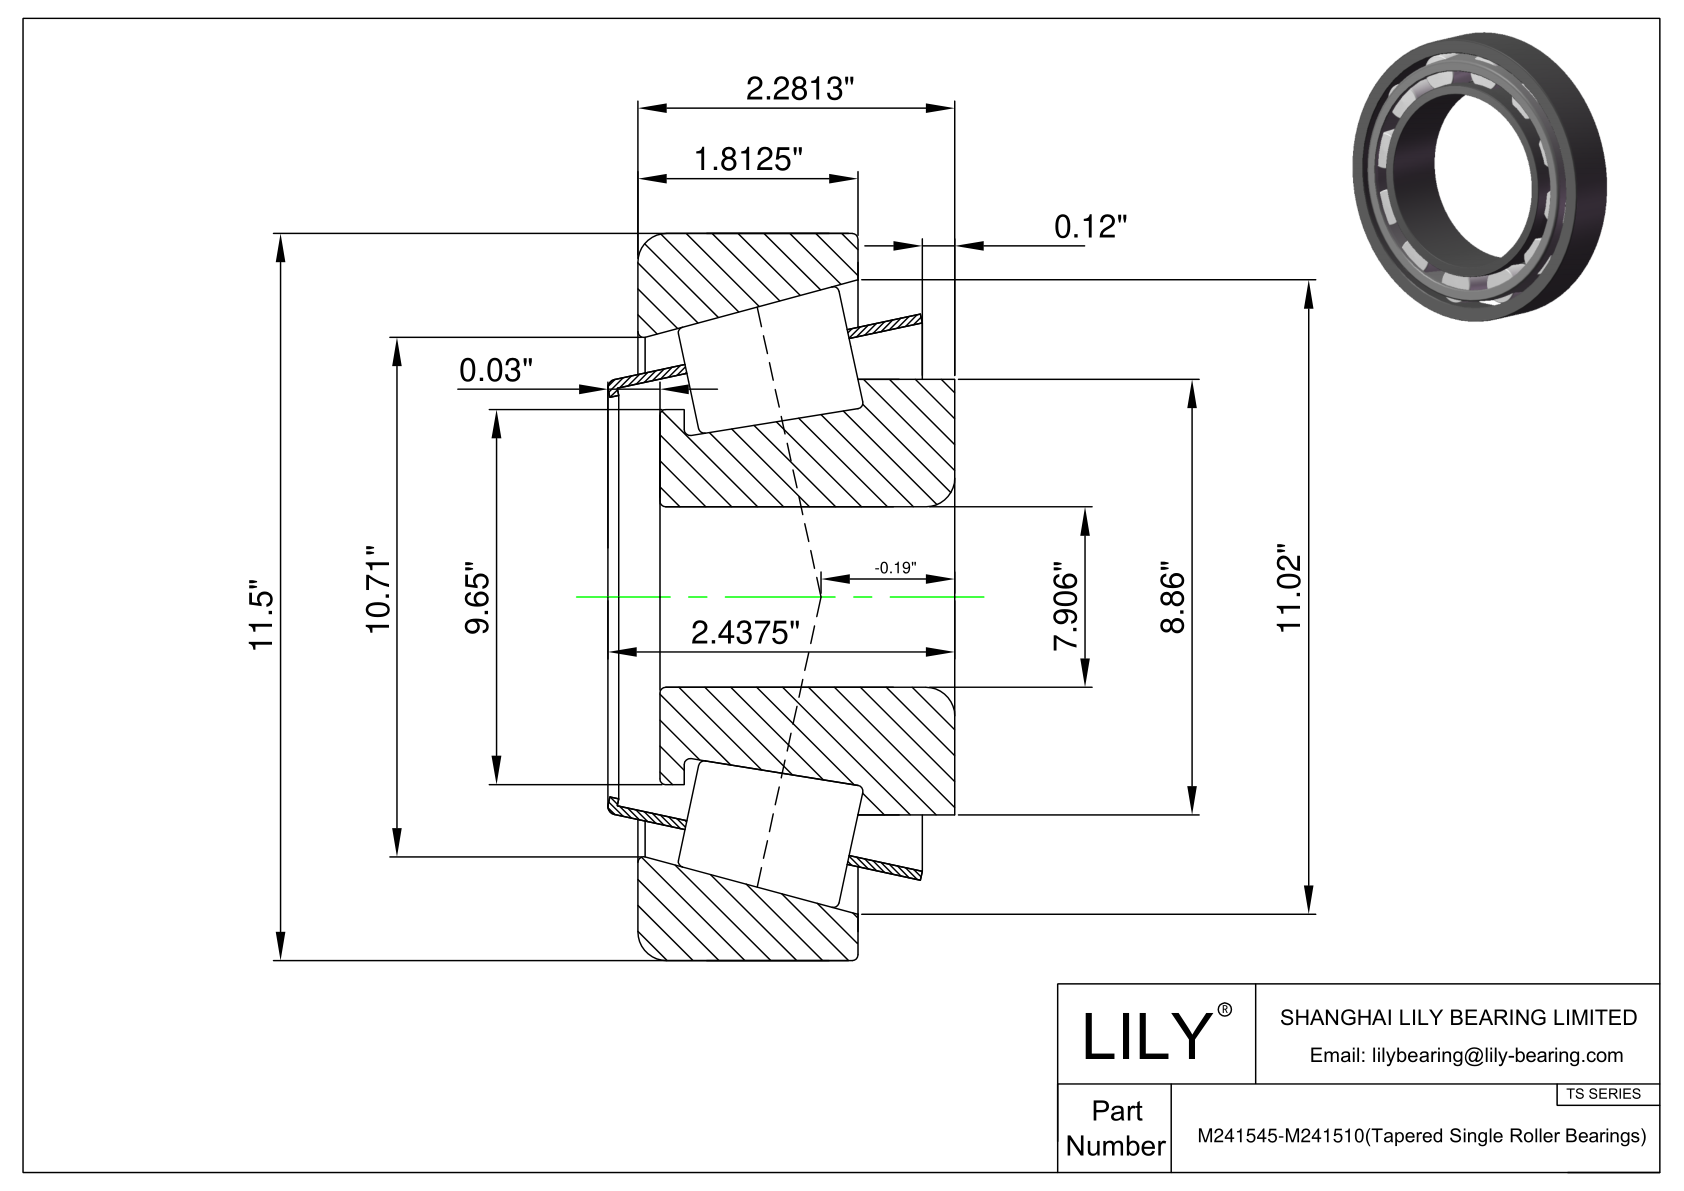 M241545-M241510 TS (Tapered Single Roller Bearings) (Imperial) cad drawing